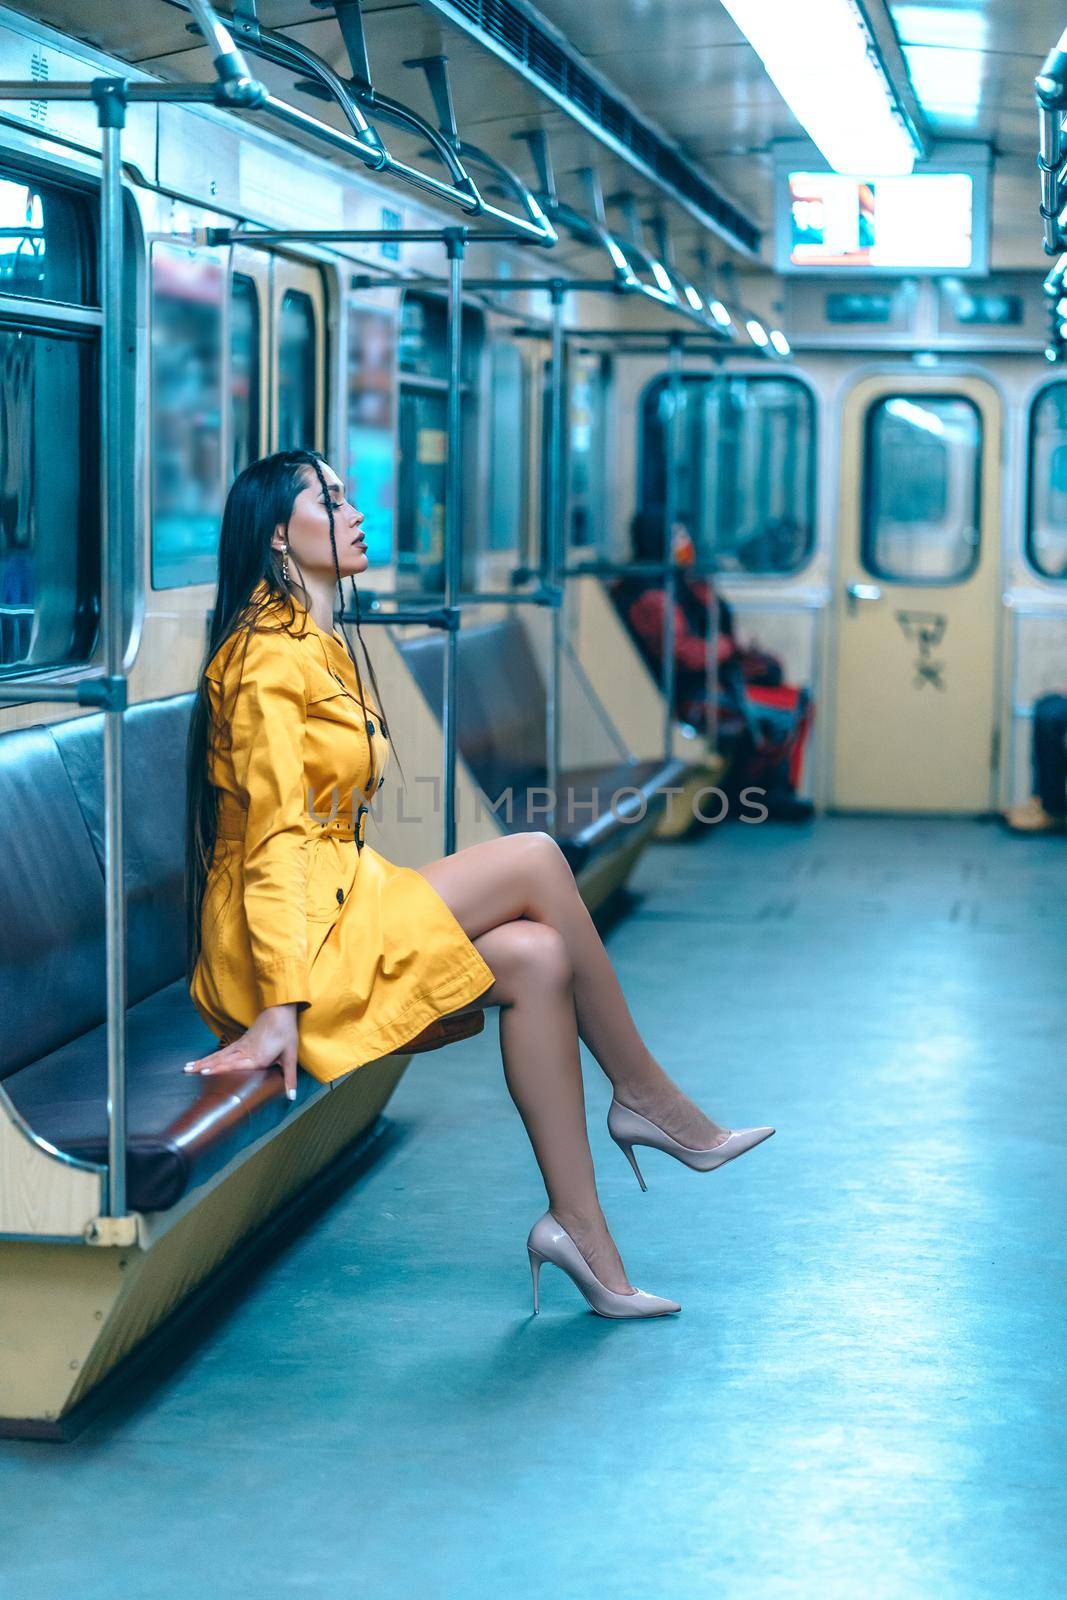 Charming Lady in a Cute Sexy Yellow Dress with Delightful Slender Legs Sitting Inside the Empty Underground Train. Full Size Profile of Nice Woman in Yellow Coat in the Train. Close-up by LipikStockMedia